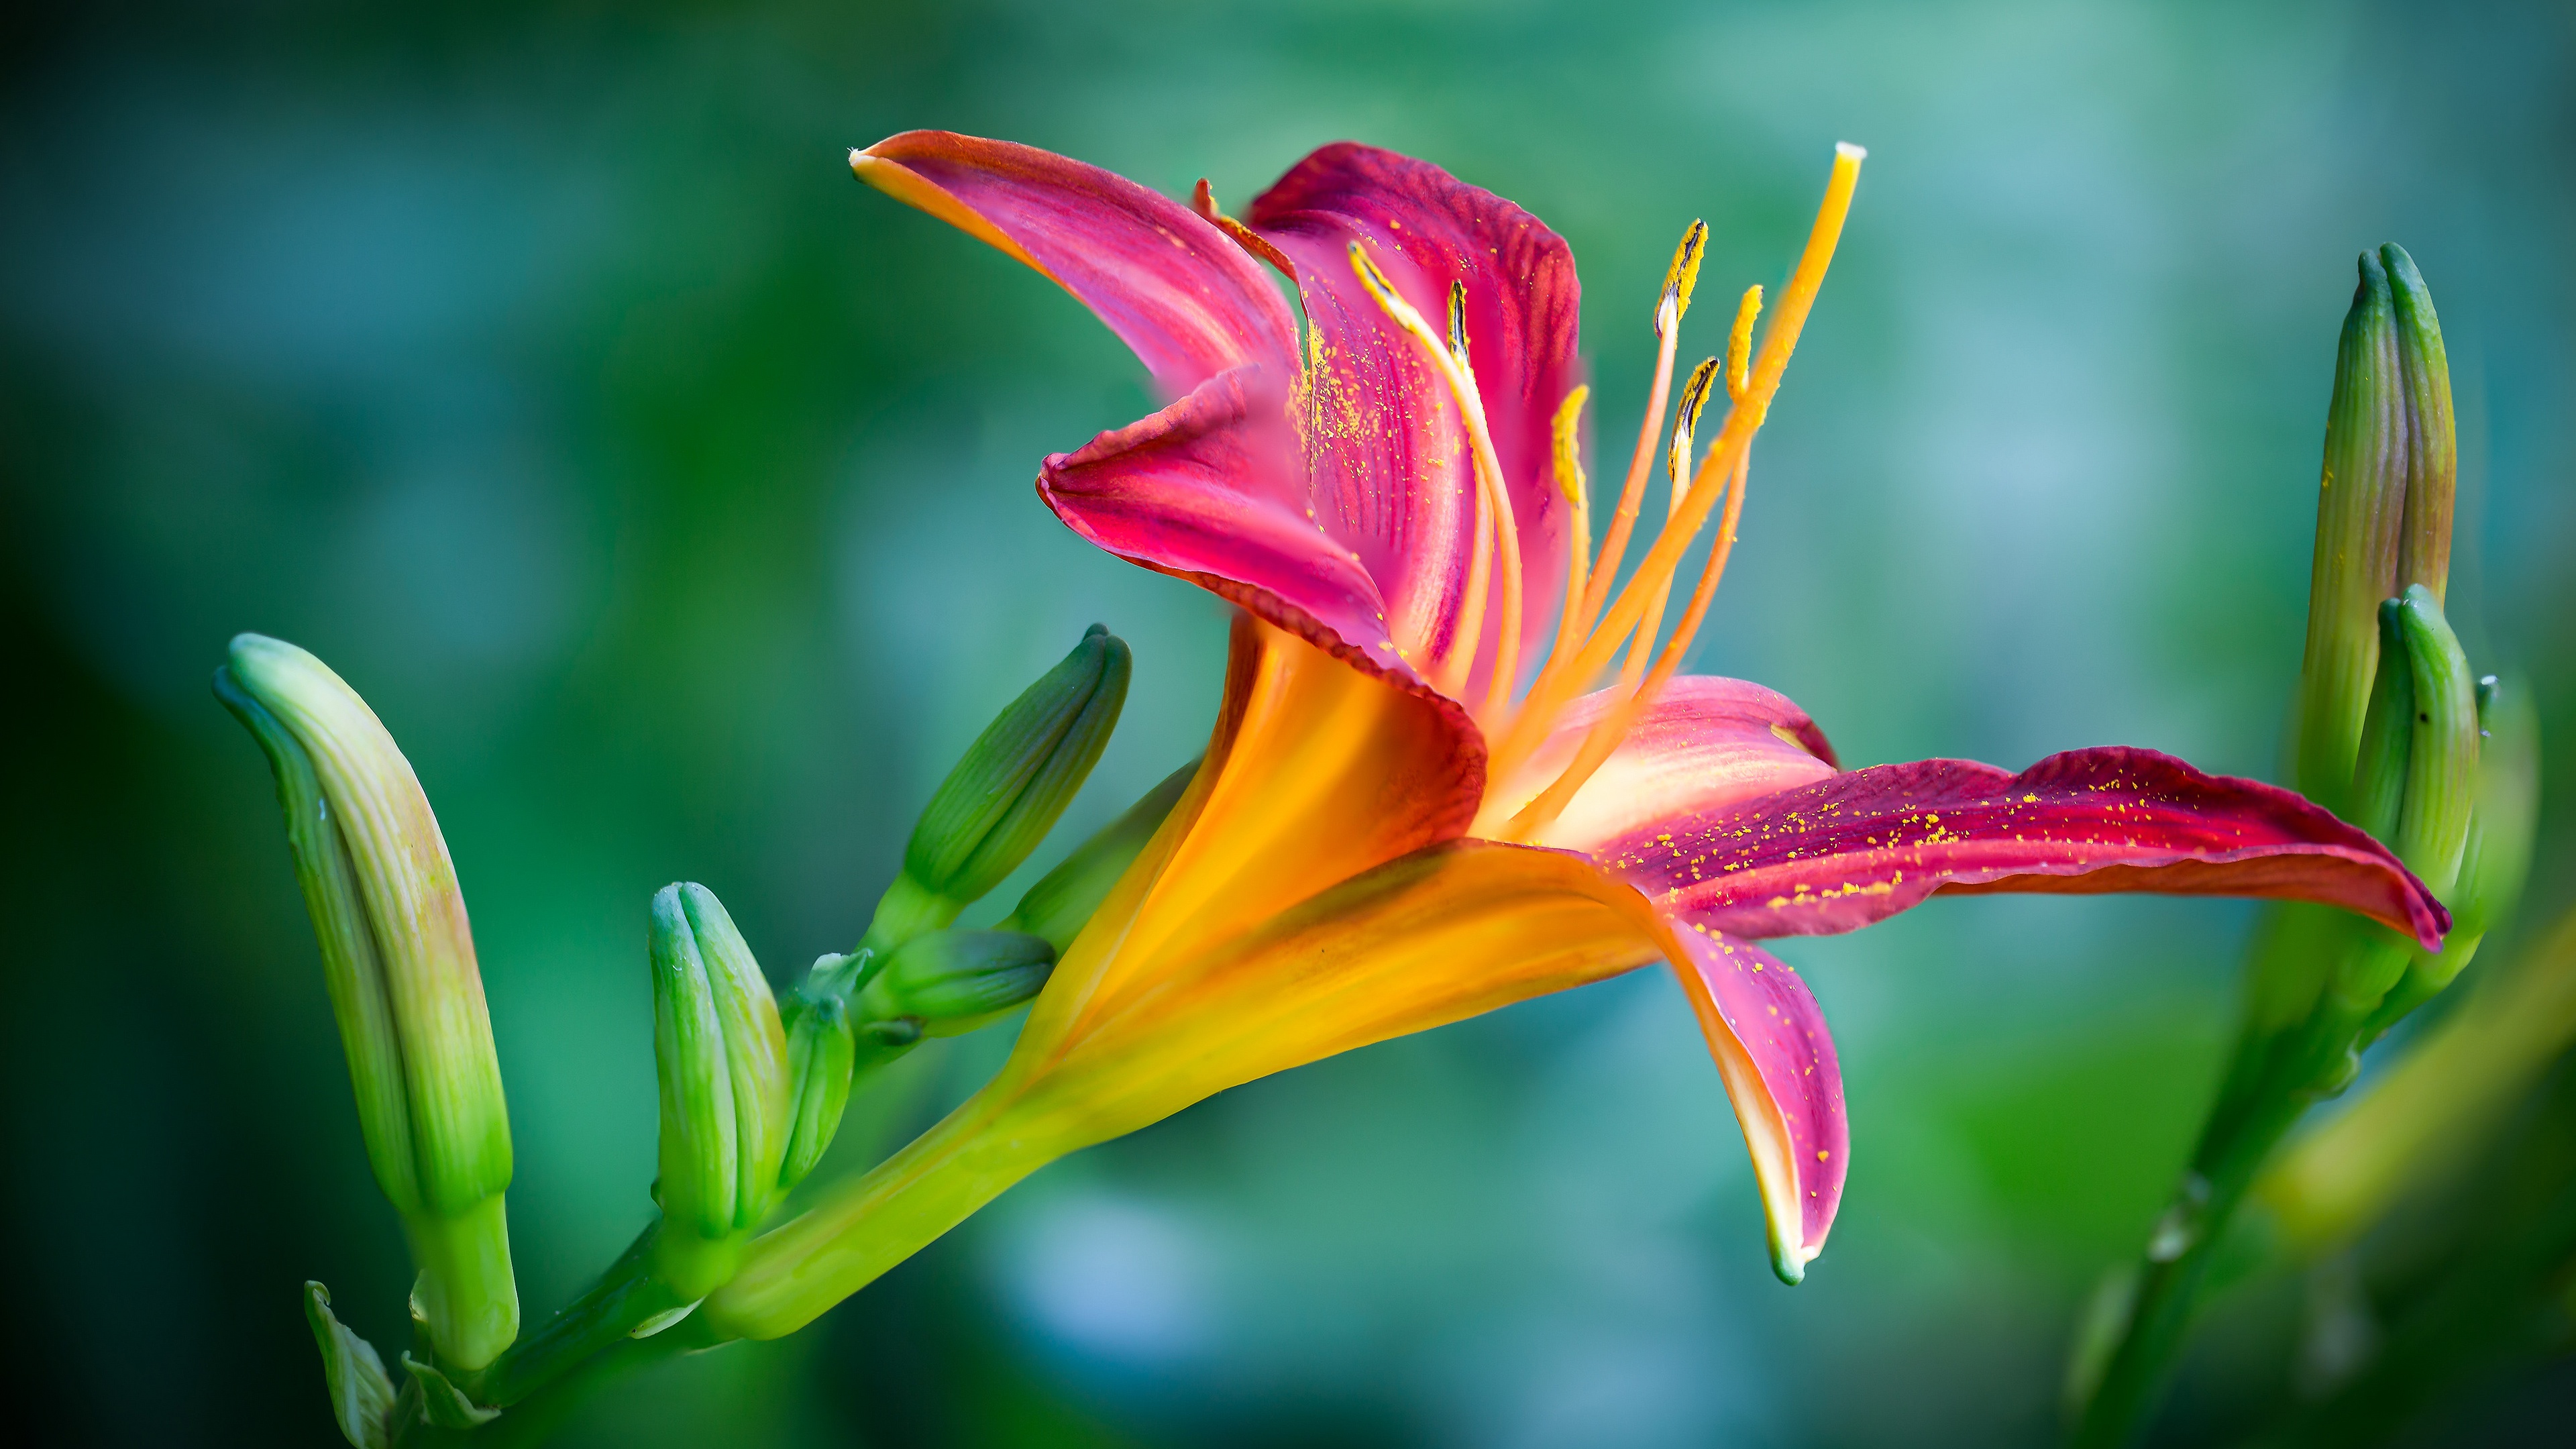  Daylily HQ Background Images